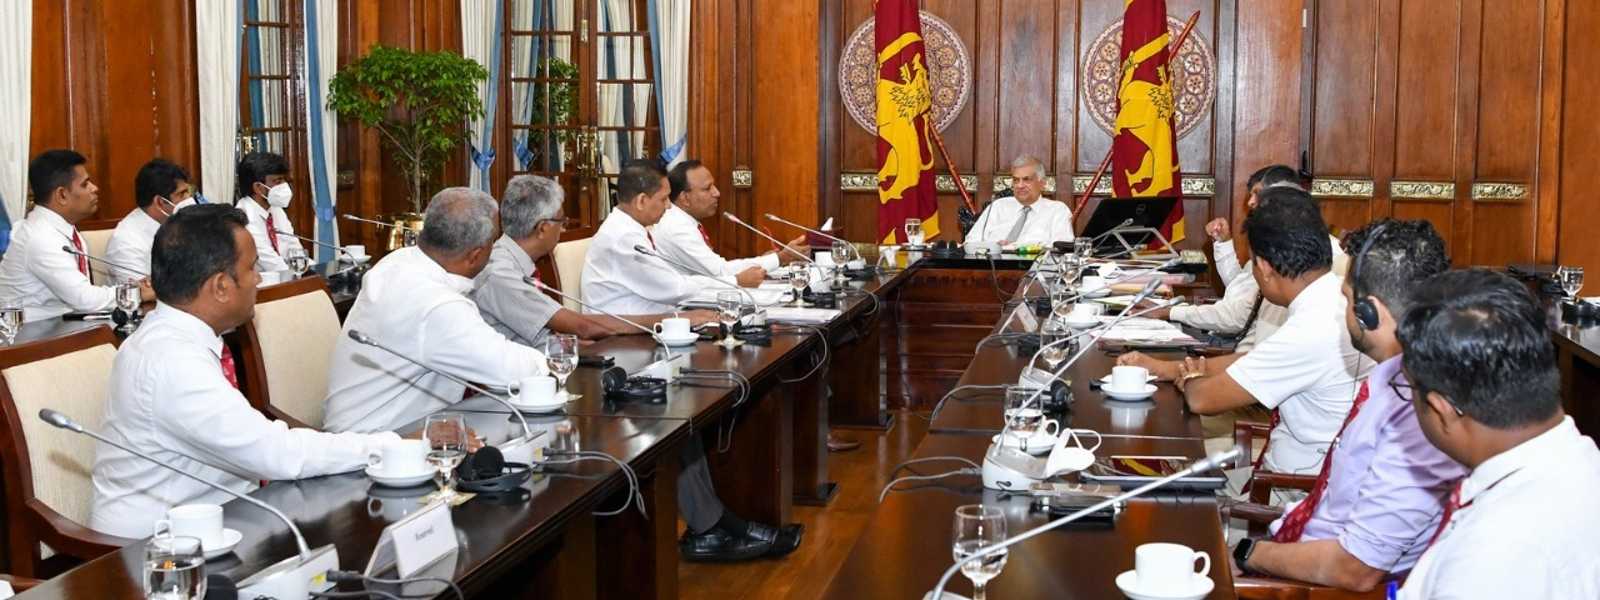 President stresses on health sector policy change